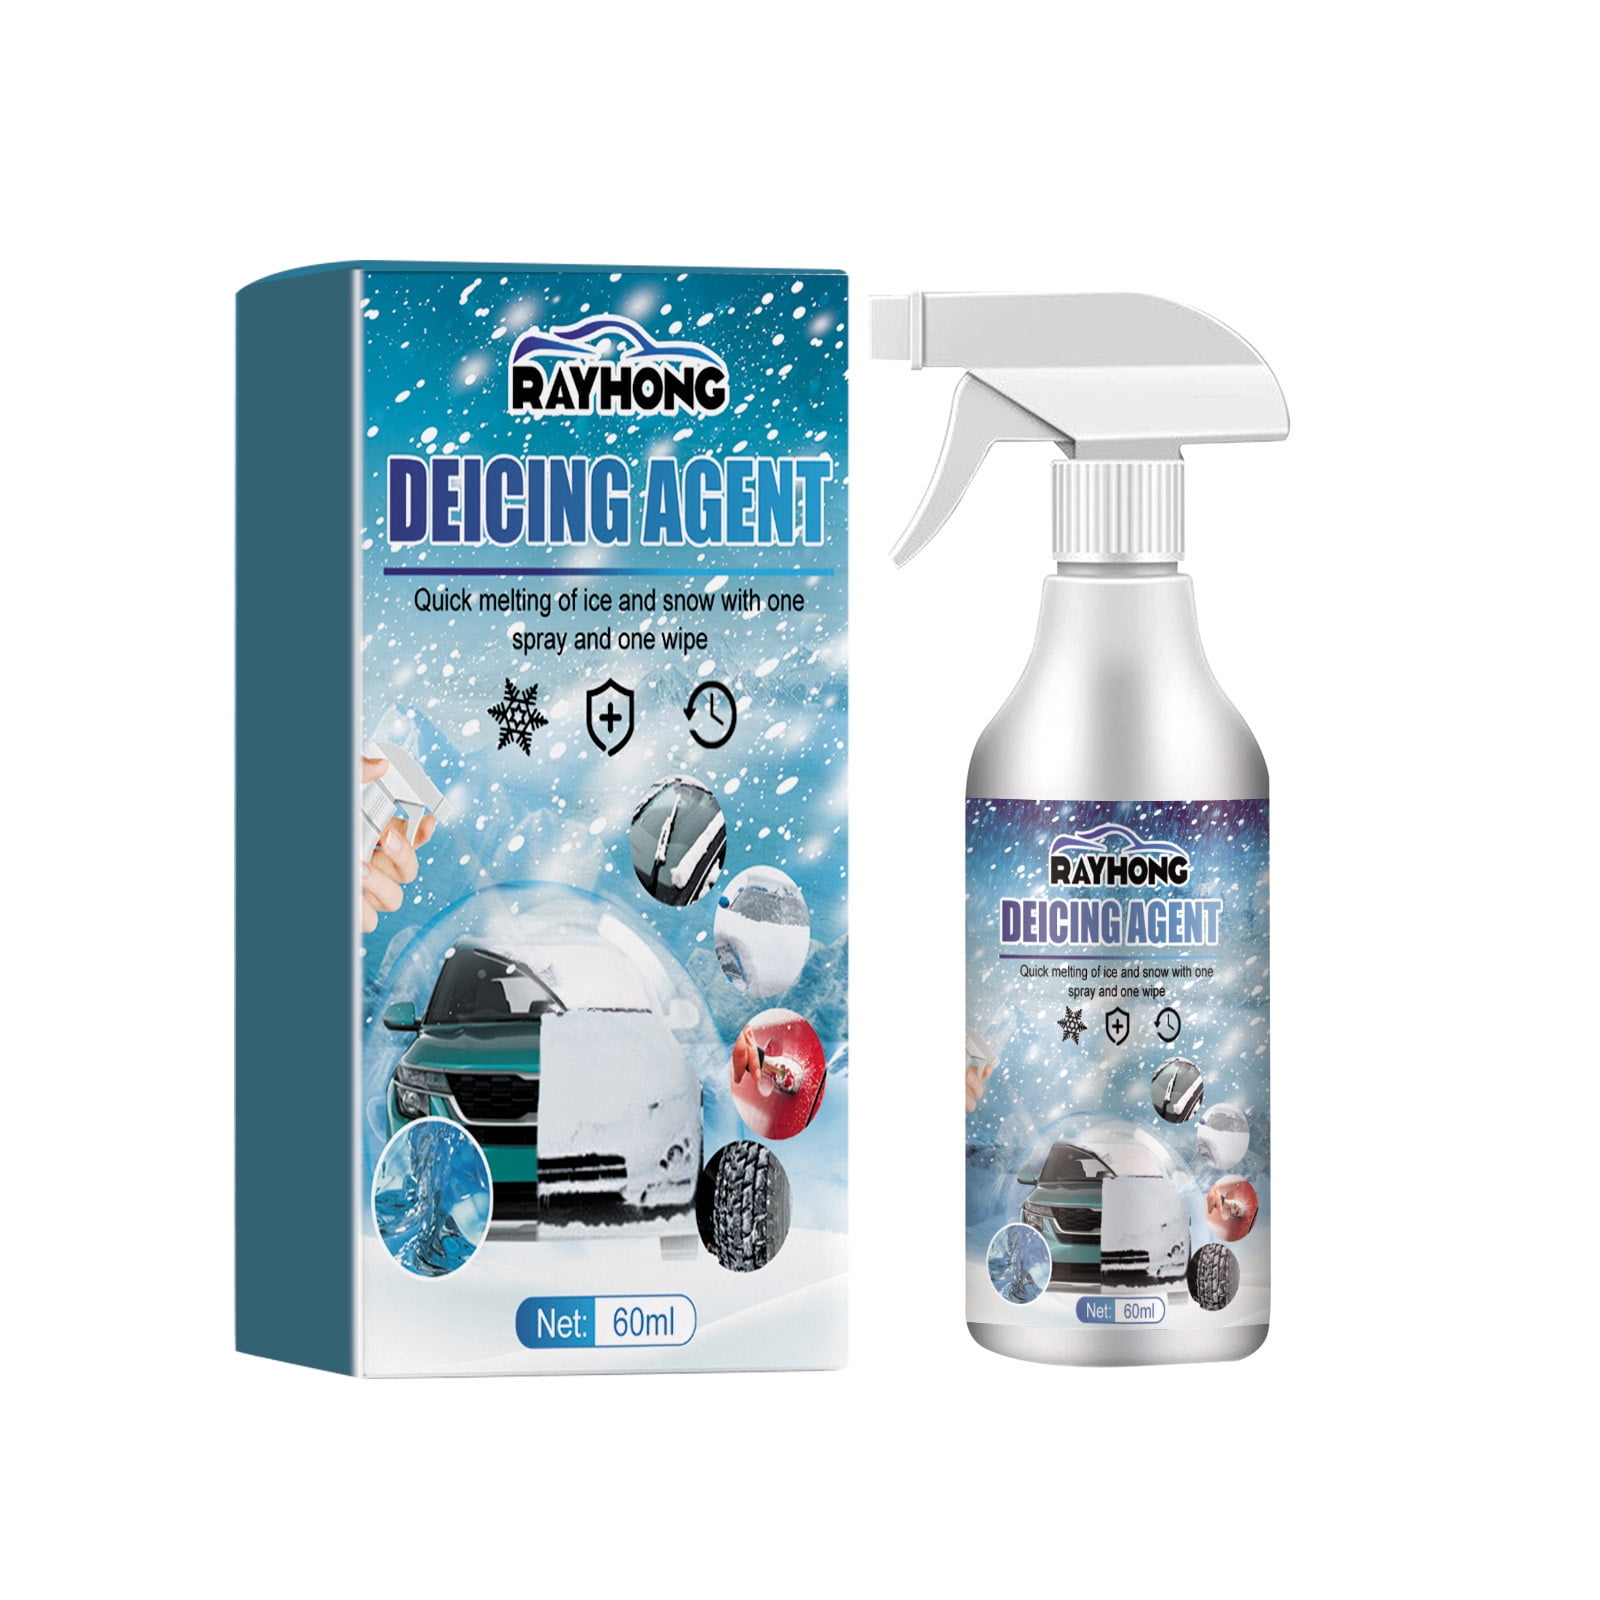 Up to 50% off! LSLJS Deicing Agent for Winter, Car Windshield Windows  De-icer Snow Melting Spray Defrosting Anti Frost Spray for Windows Mirrors  Glass and Wipers (60ml) 